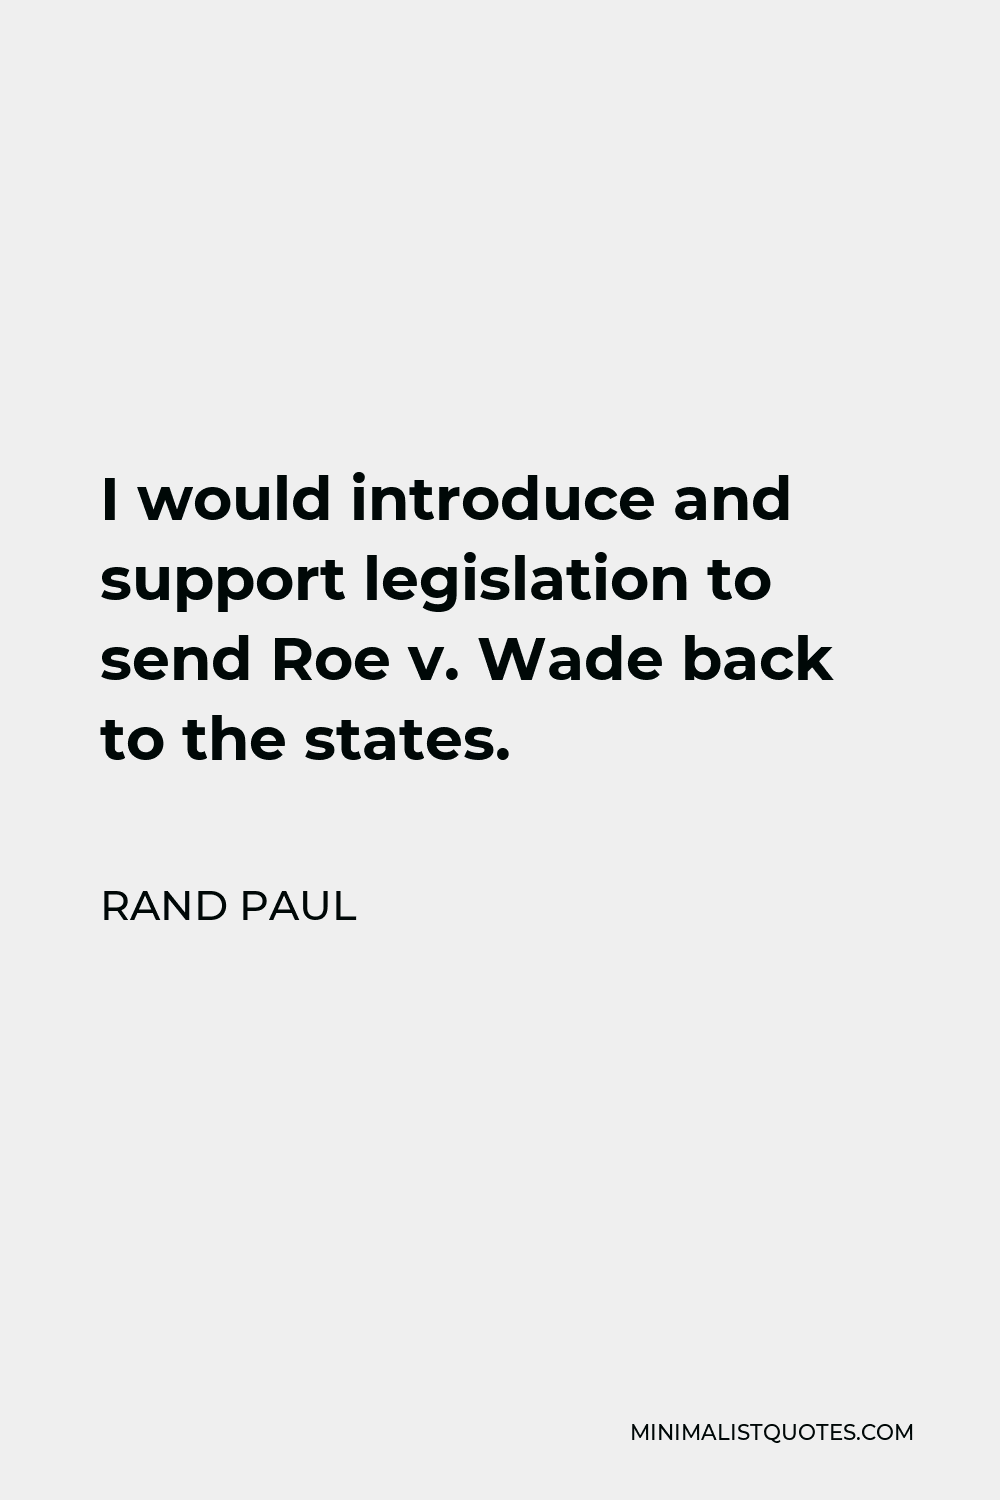 Rand Paul Quote - I would introduce and support legislation to send Roe v. Wade back to the states.